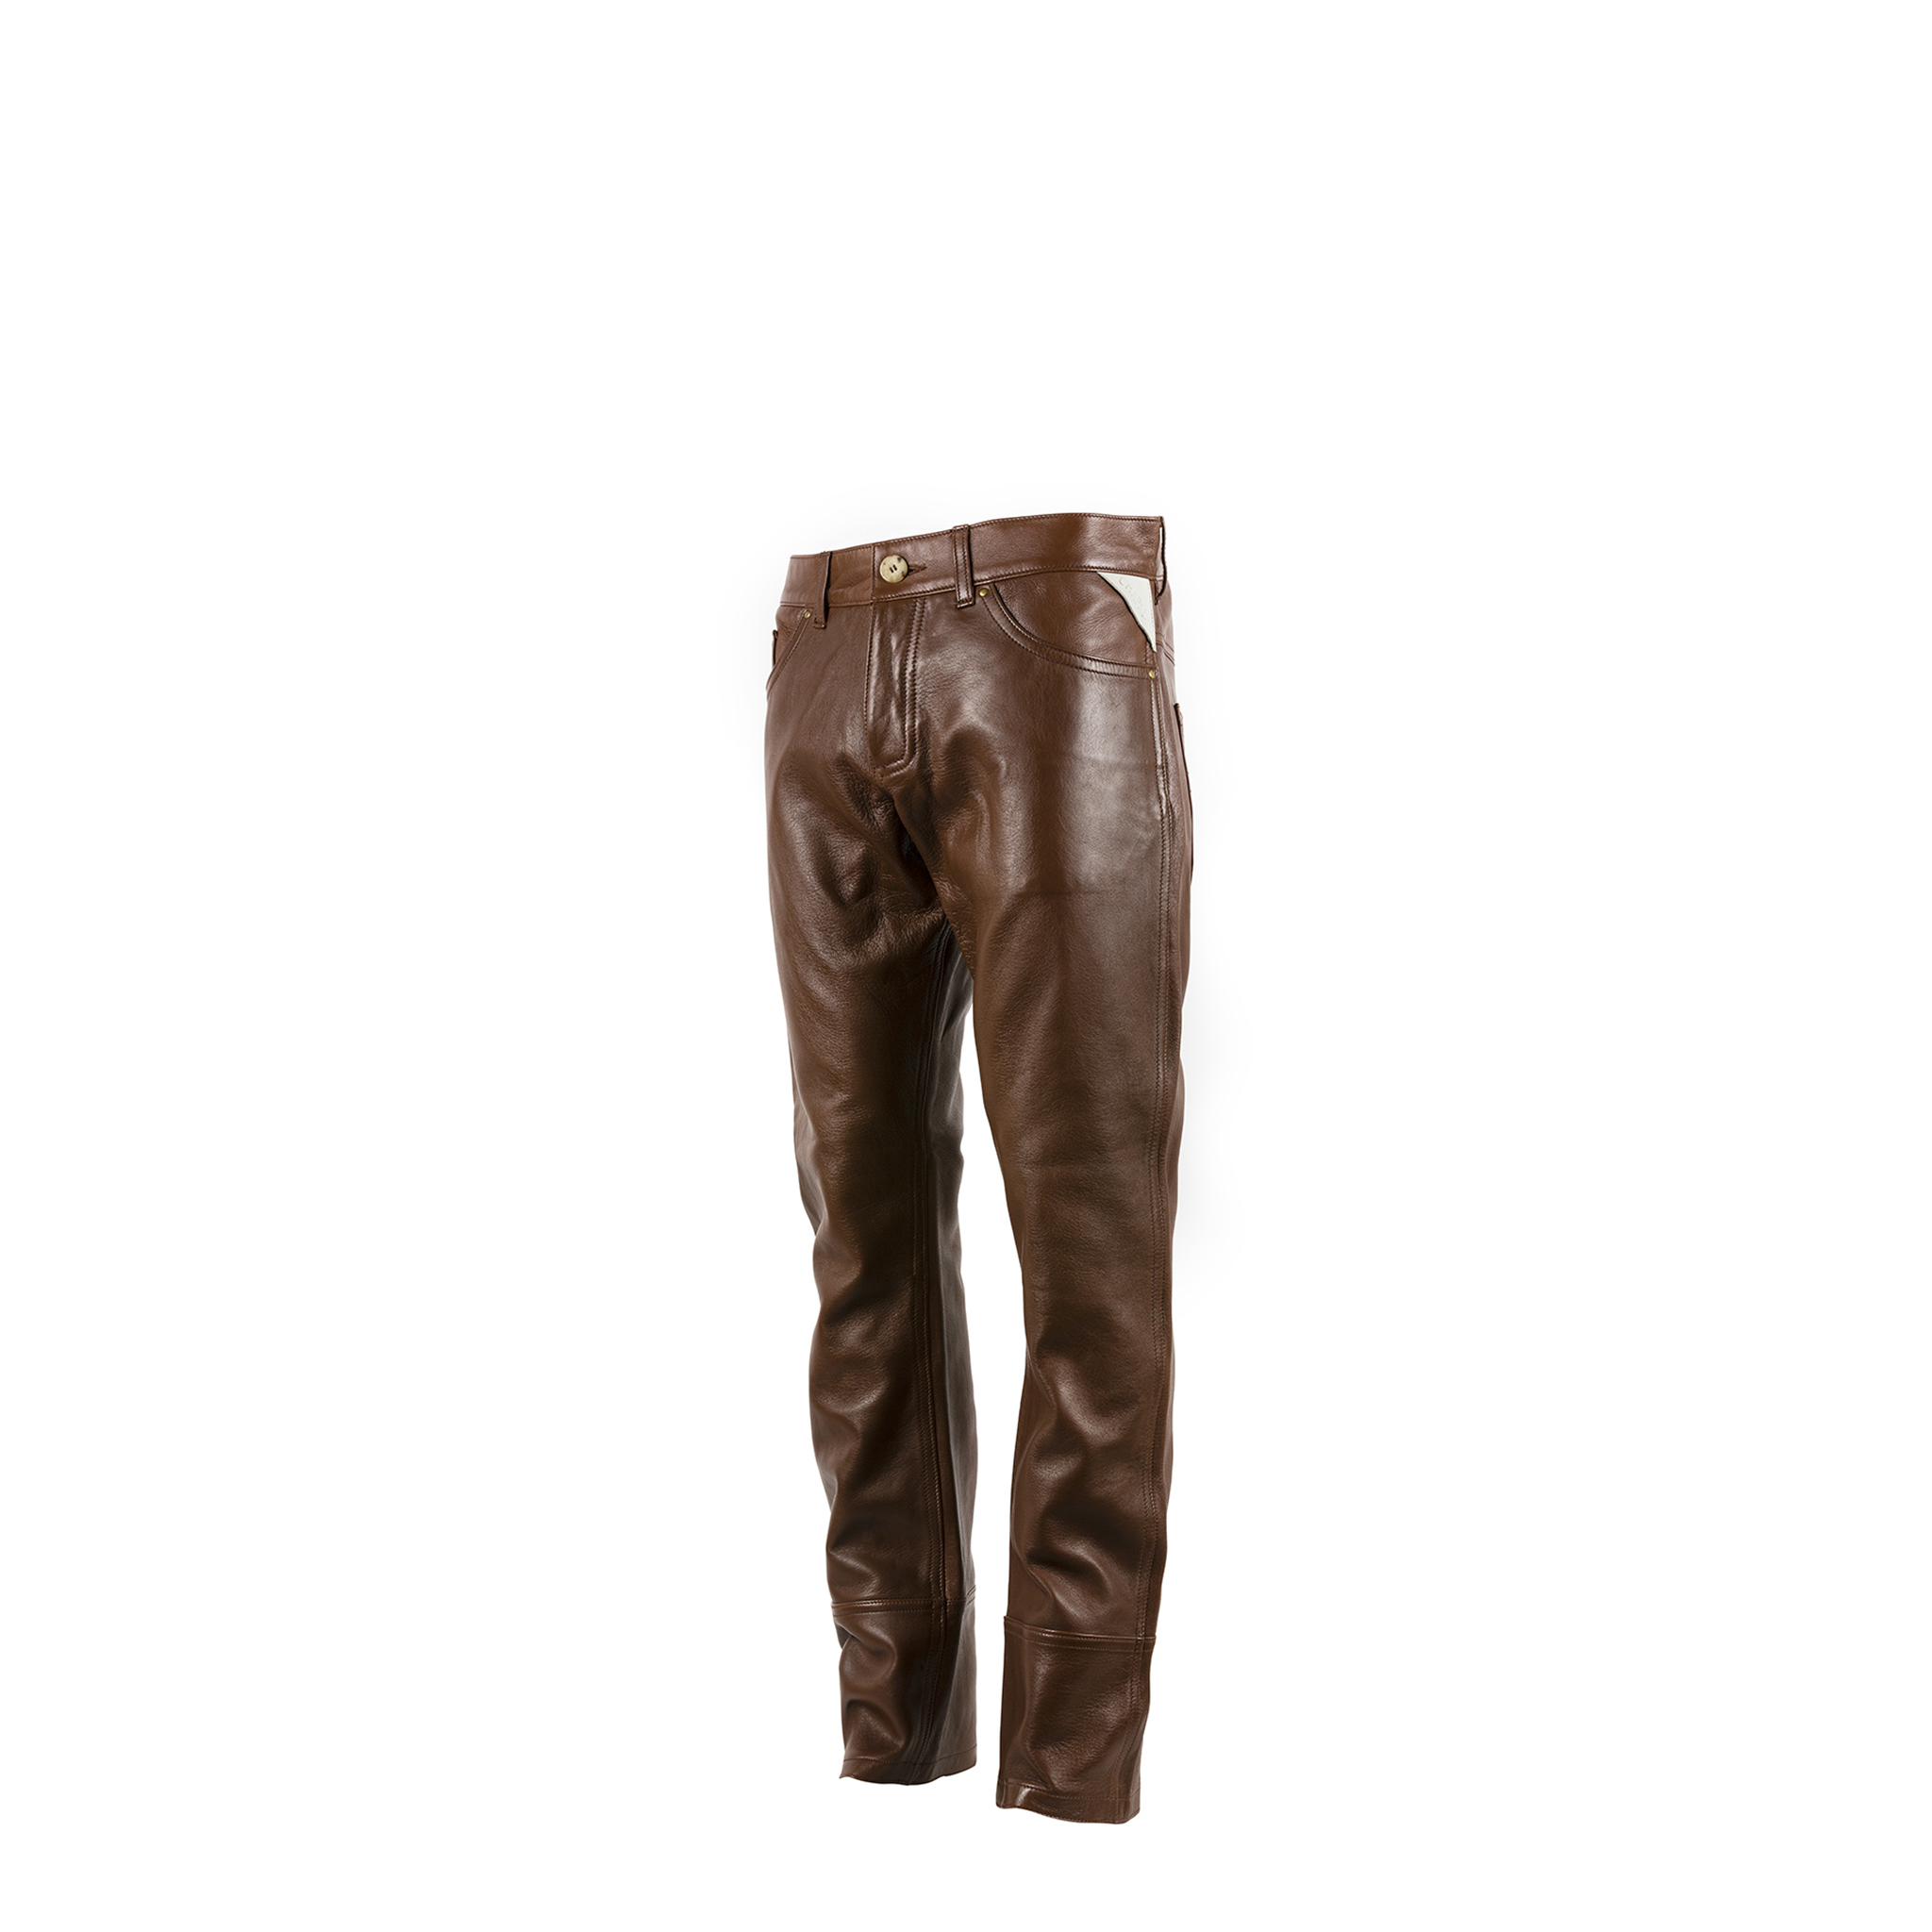 Pants 2008A - Glossy leather - Brown color